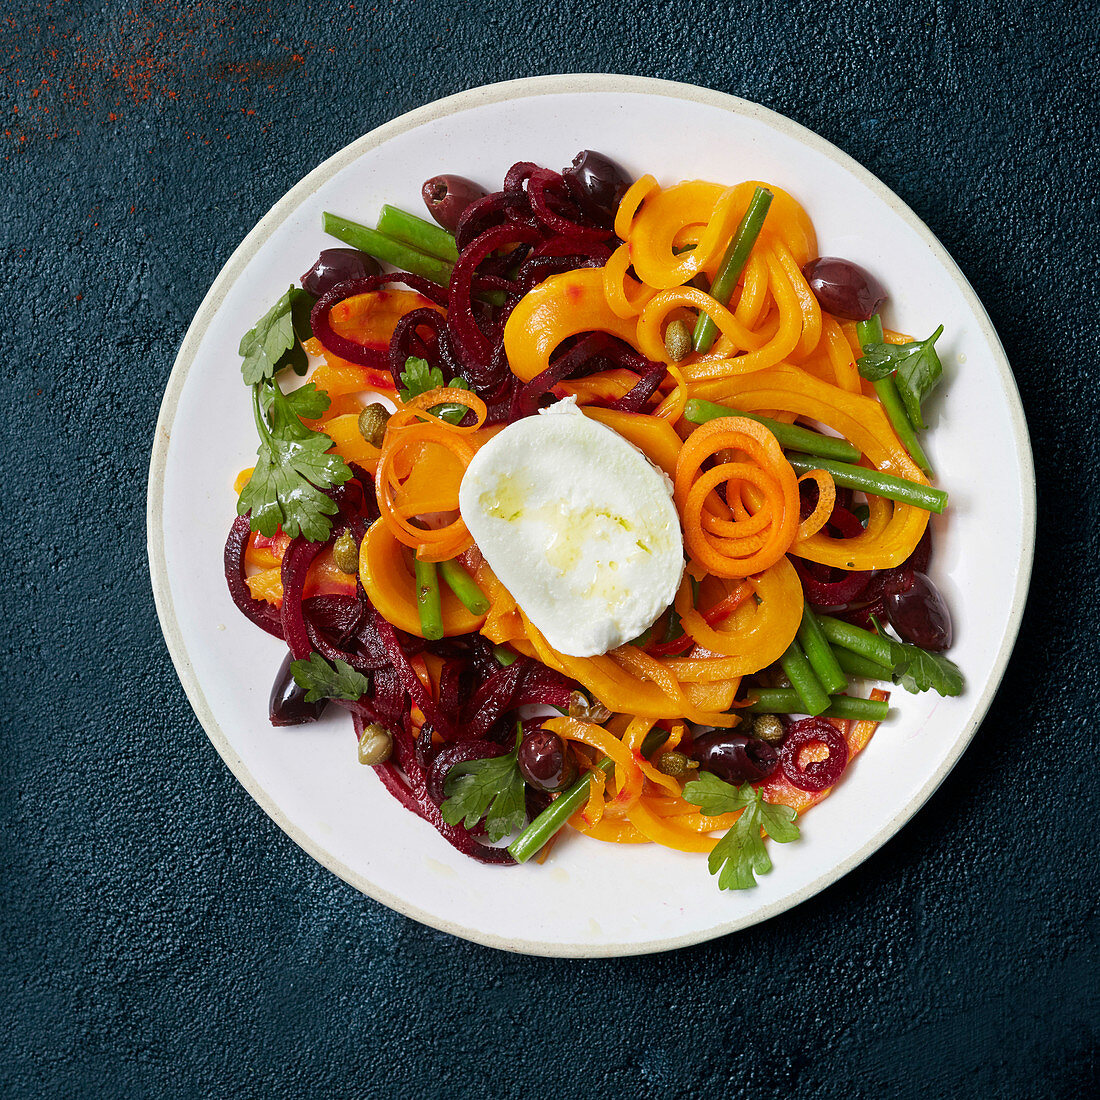 Carrot and beetroot spaghetti with green beans, olives and mozzarella cheese